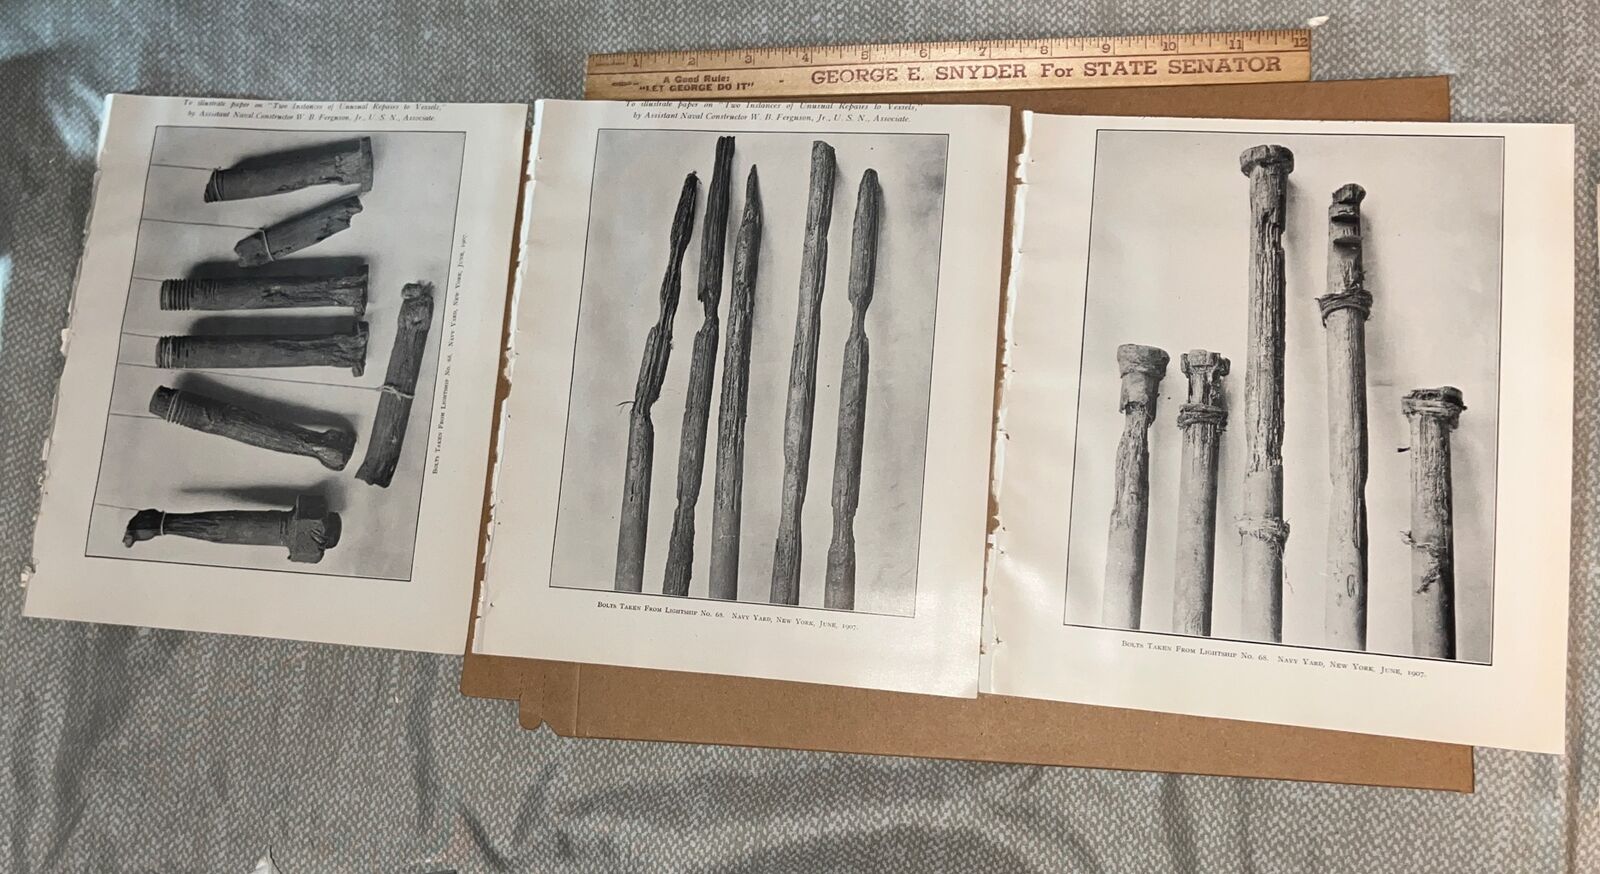 3 Antique 1907 Plates: Bolts Taken From Lightship No 68 @ New York Navy Yard